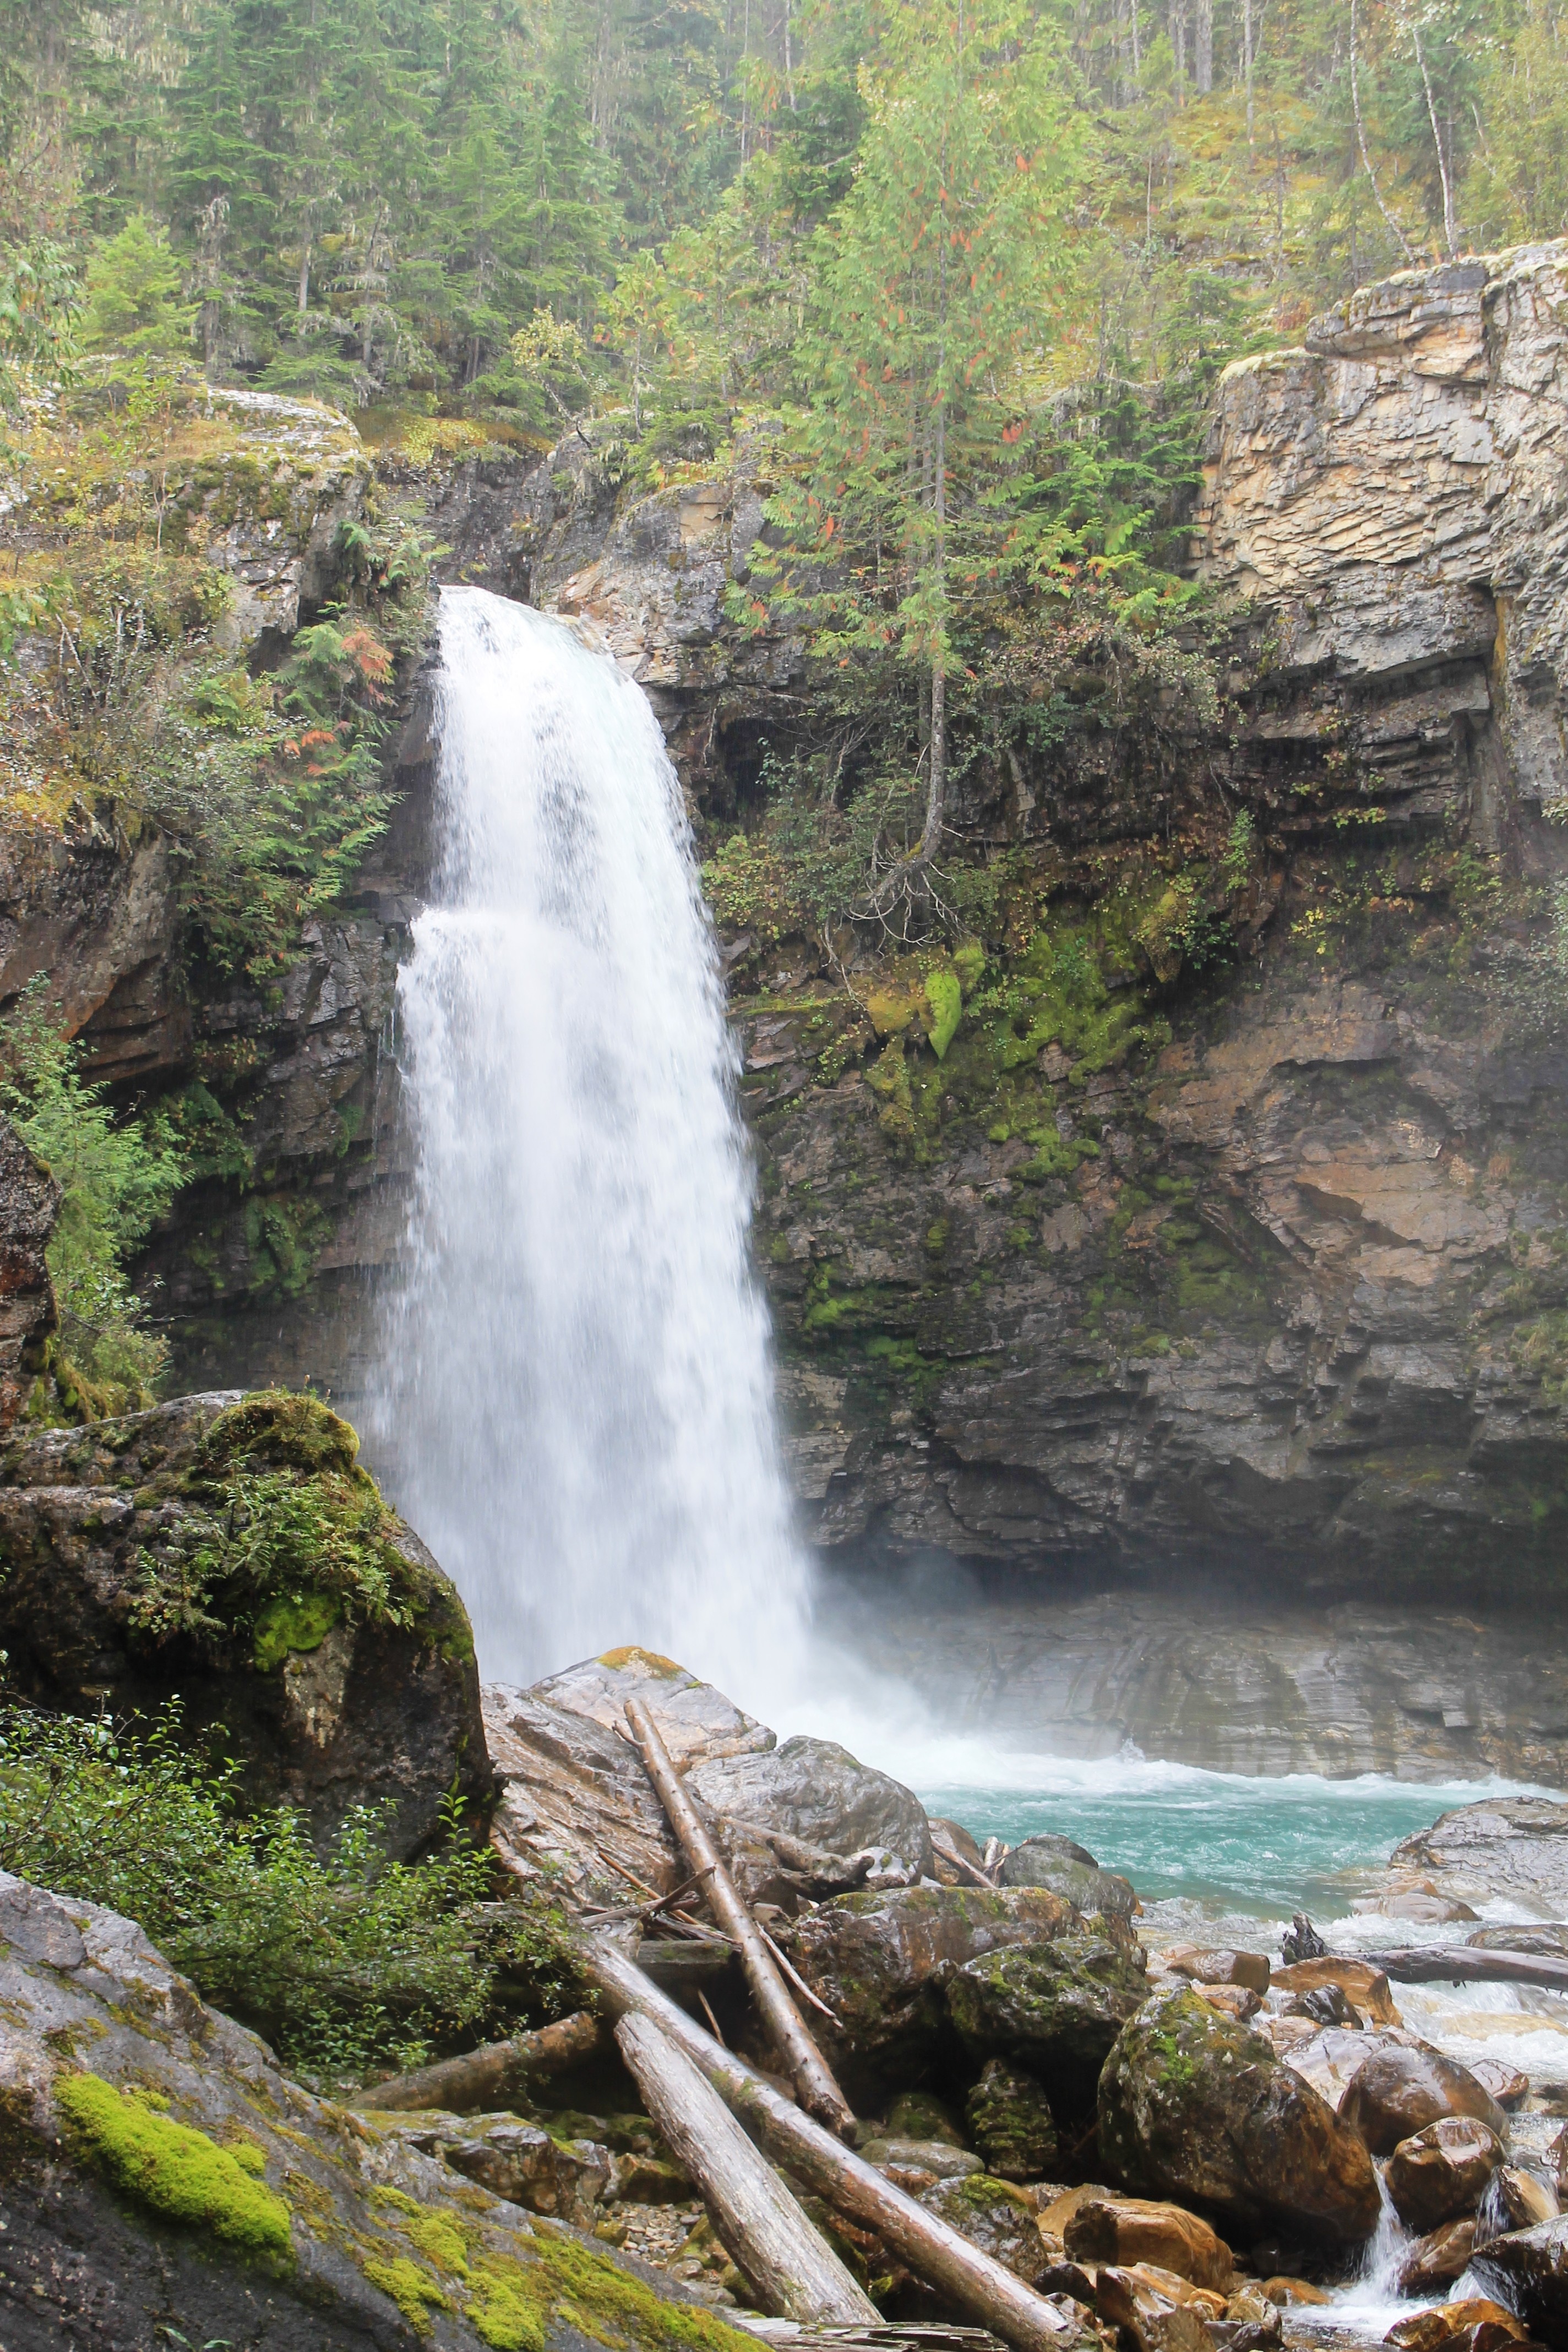 Download this Sutherland Falls picture